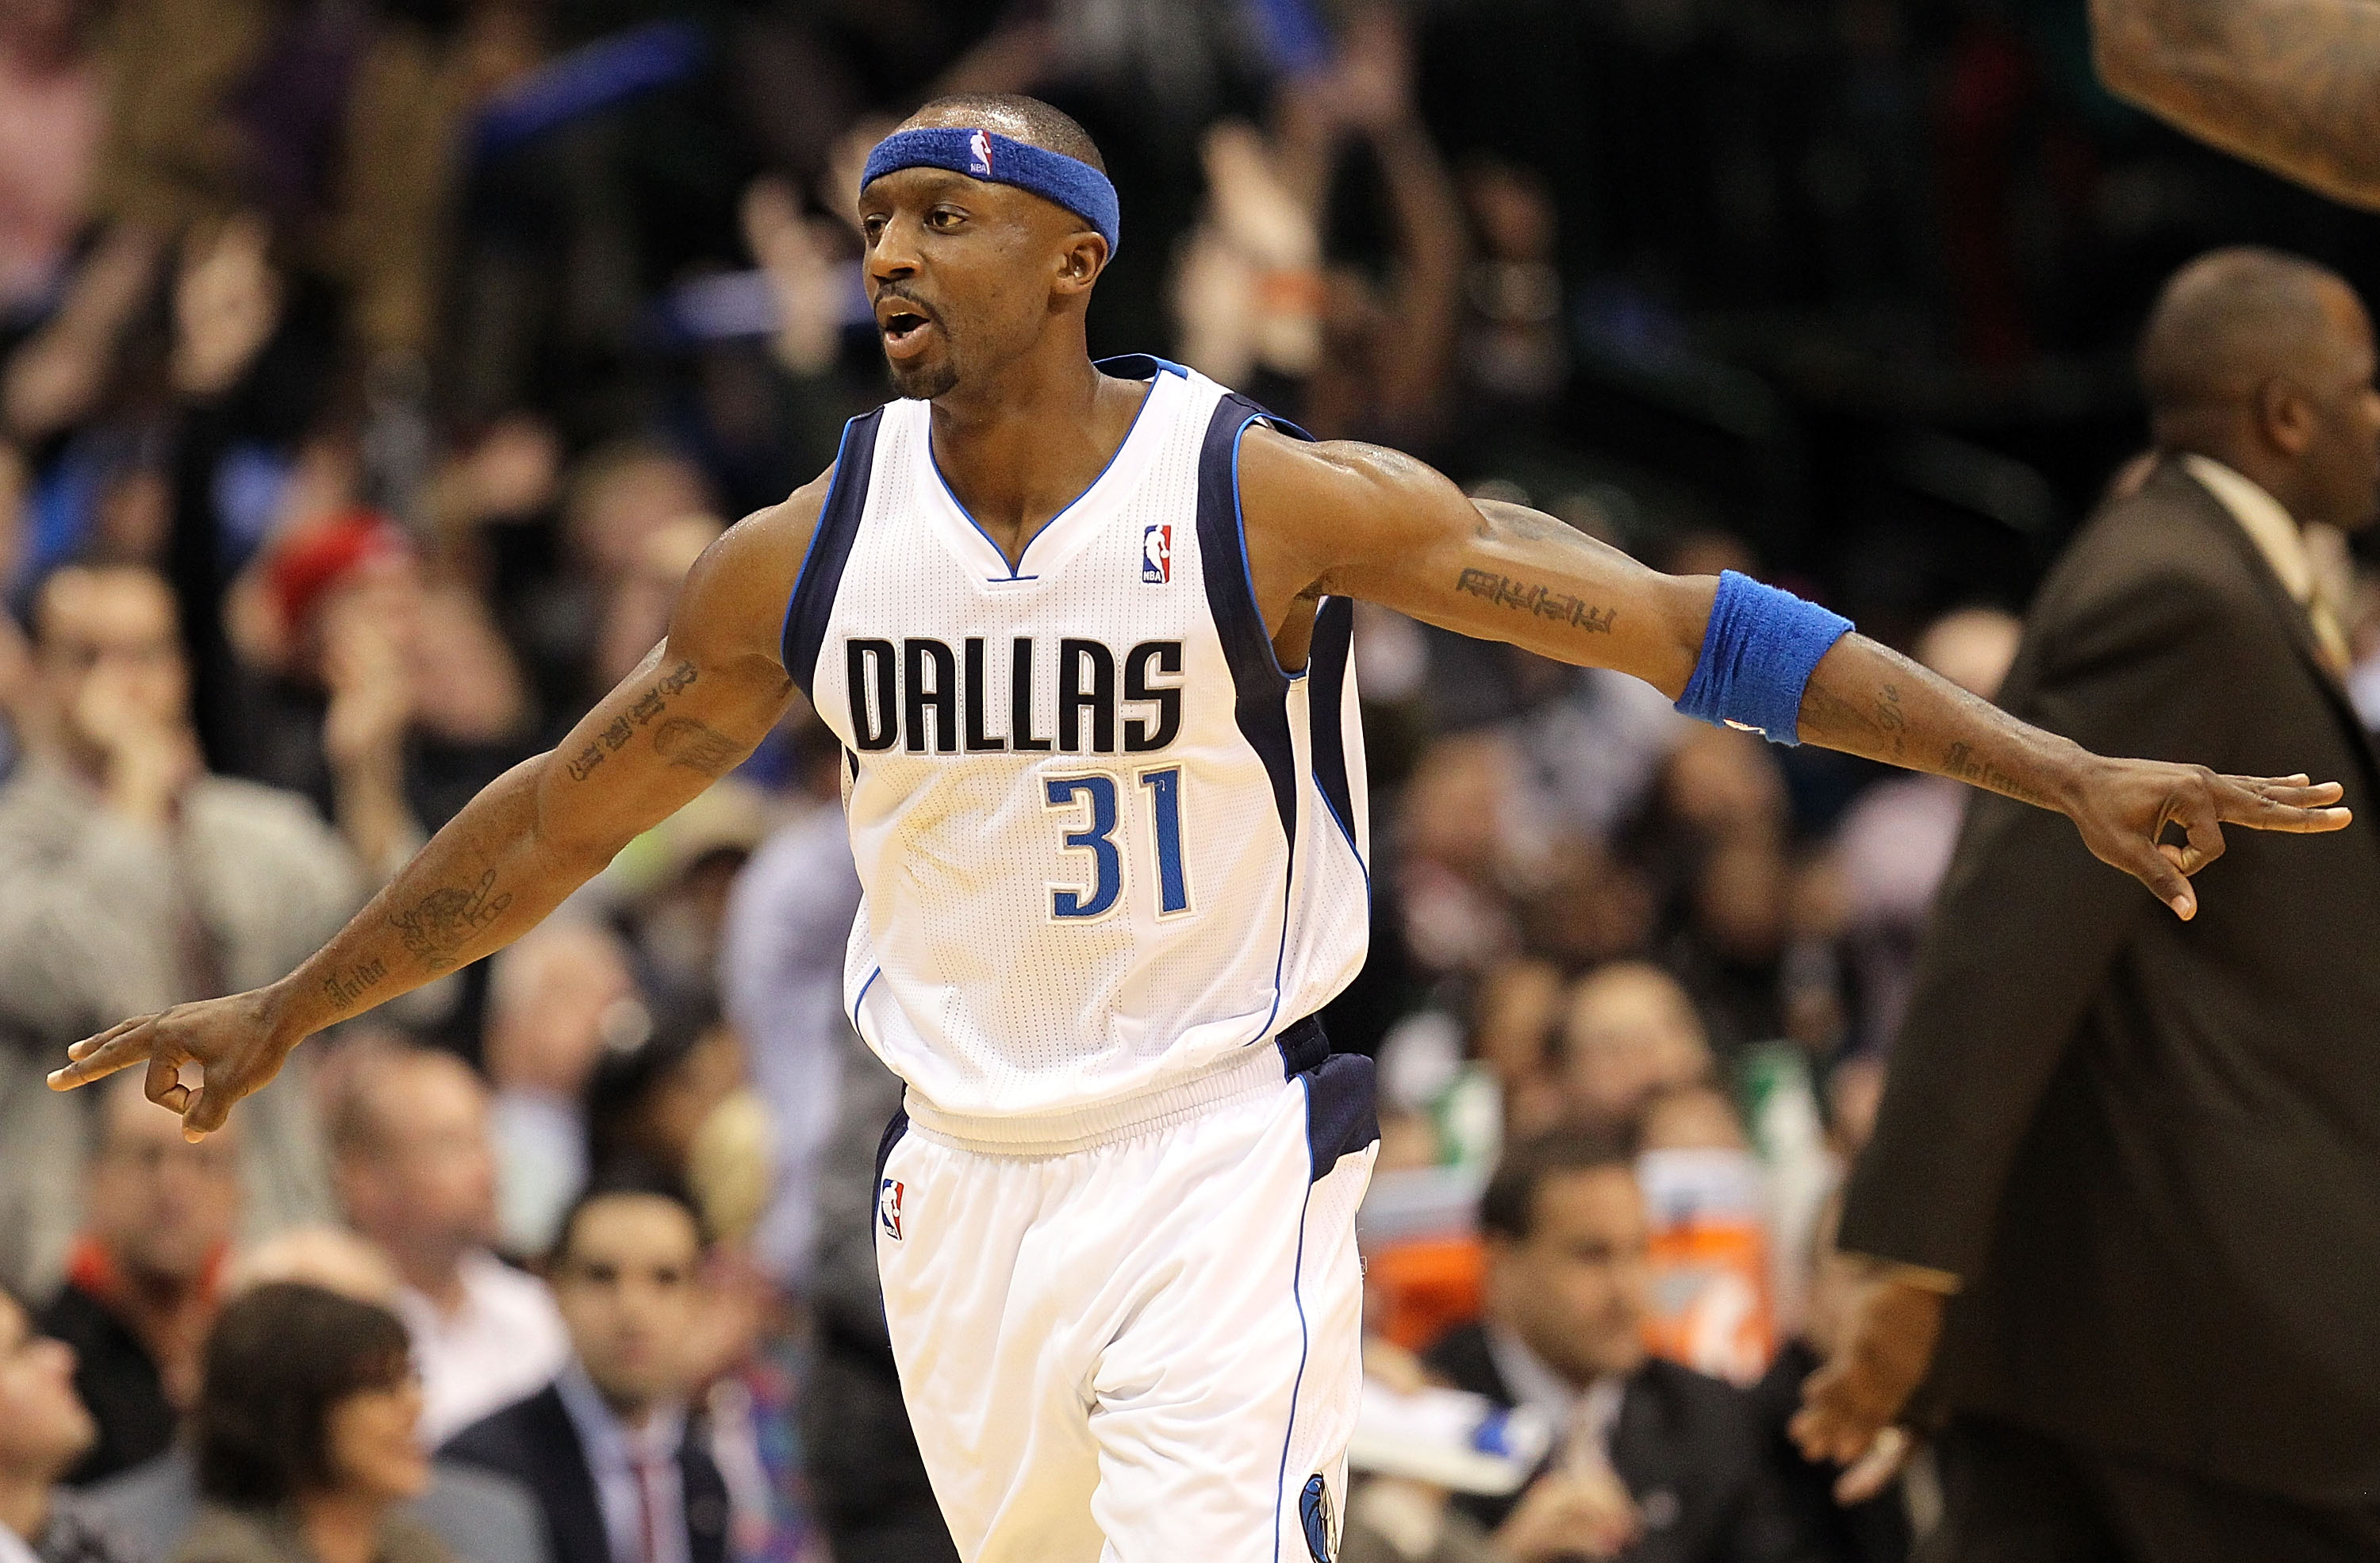 DALLAS, TX - JANUARY 04:  Guard Jason Terry #31 of the Dallas Mavericks reacts  after making a three point shot against the Portland Trail Blazers at American Airlines Center on January 4, 2011 in Dallas, Texas.  NOTE TO USER: User expressly acknowledges